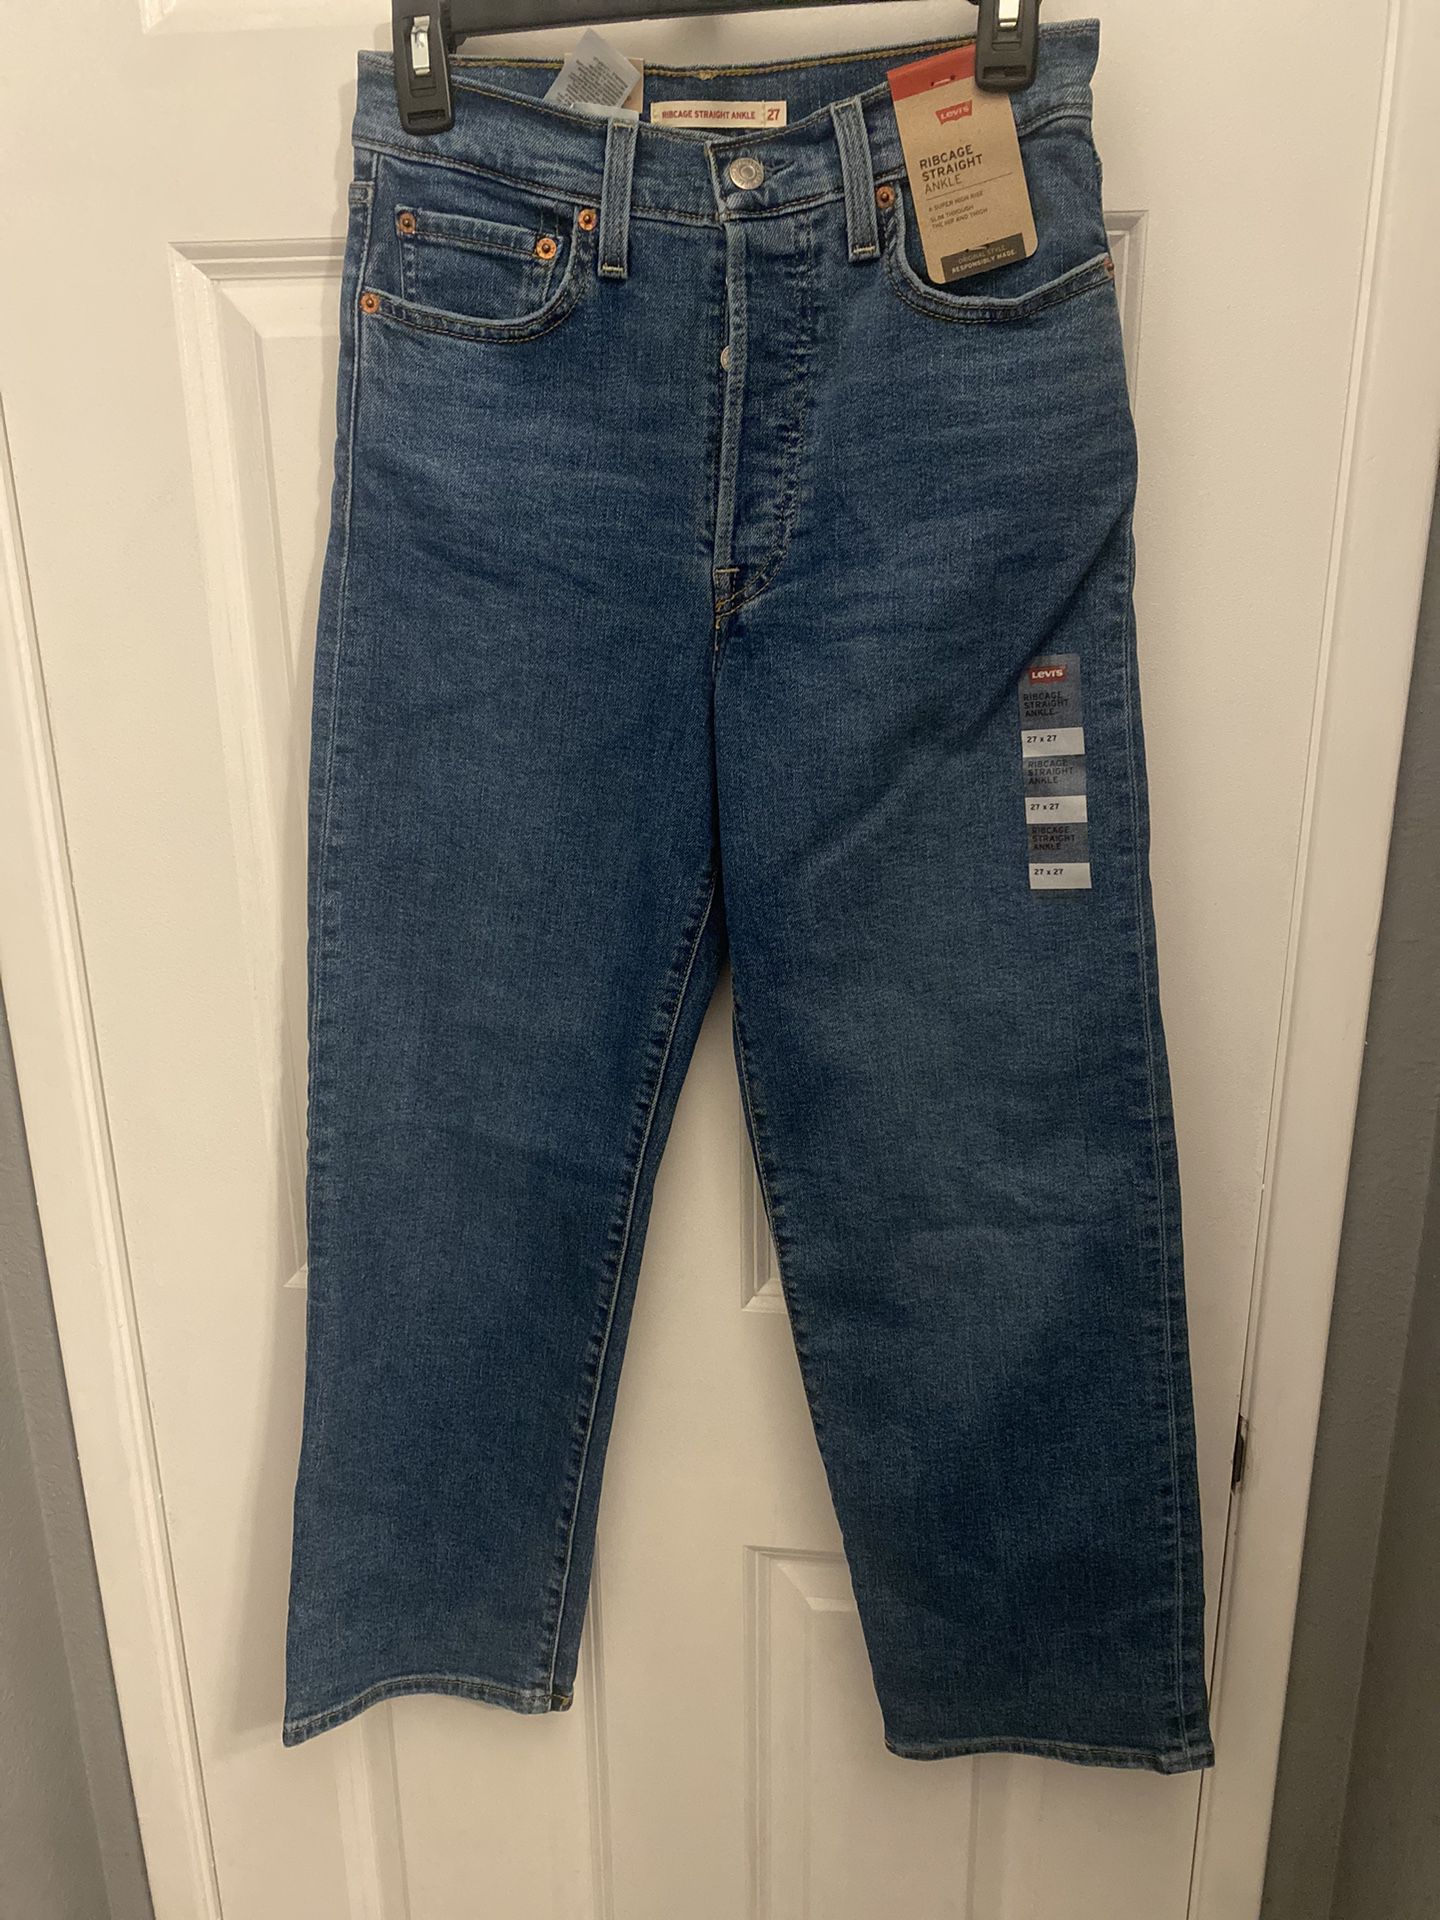 Levi’s High Rise Jeans